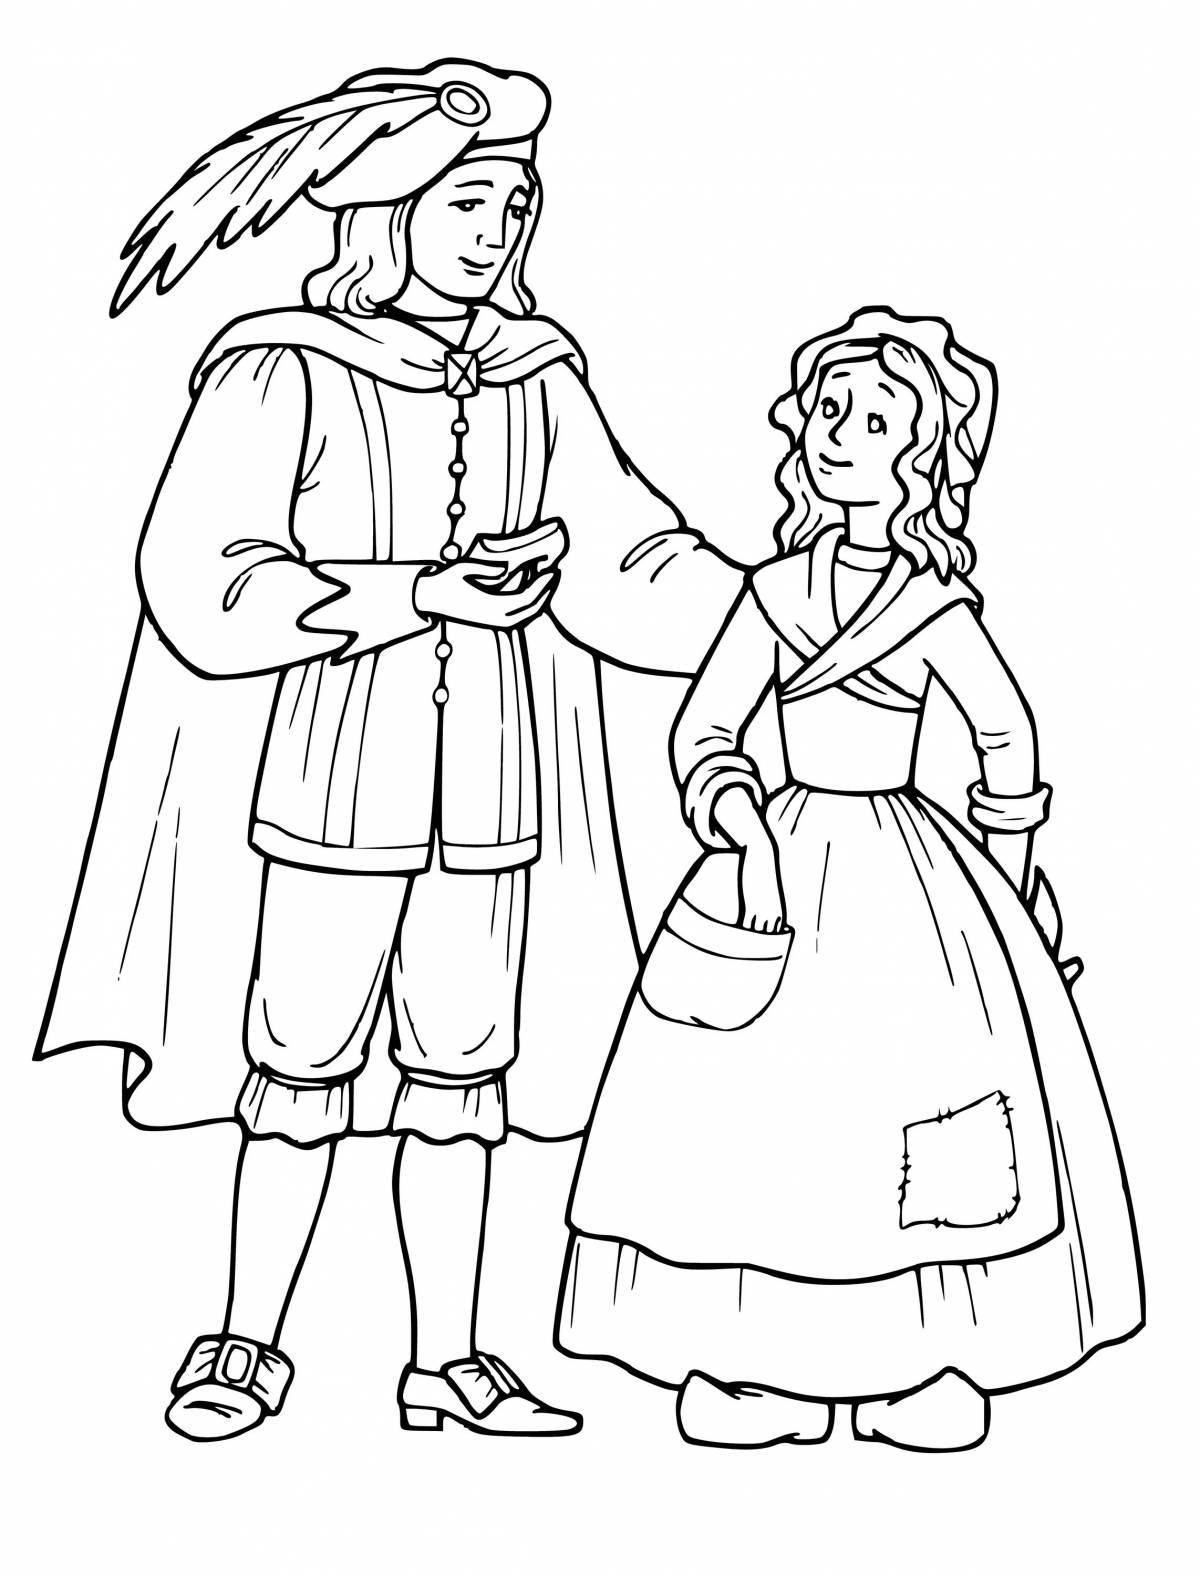 Coloring book magnanimous Cinderella and Charles Perrault